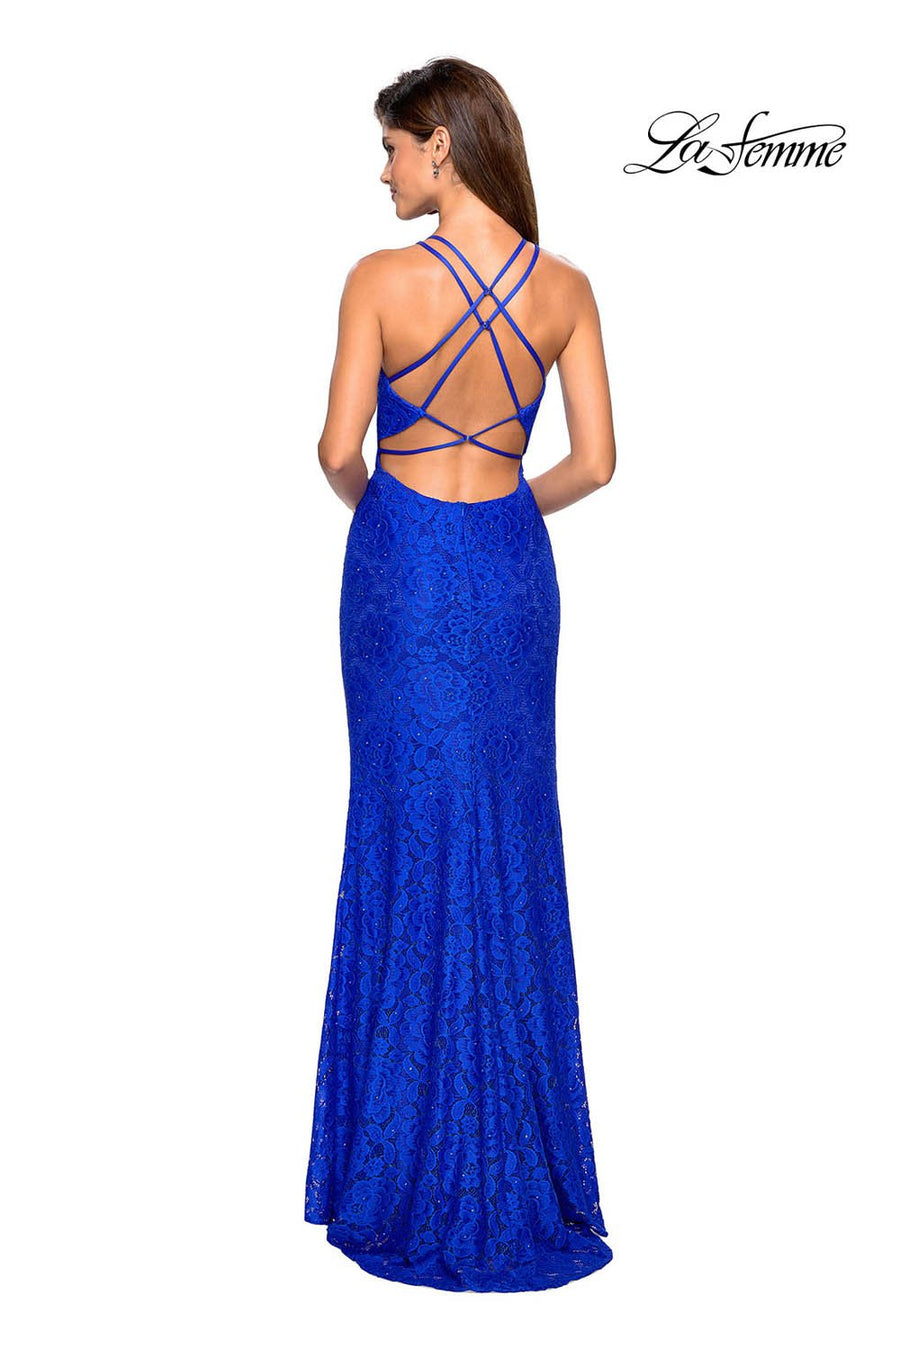 La Femme 27046 prom dress images.  La Femme 27046 is available in these colors: Electric Blue, Red, White.